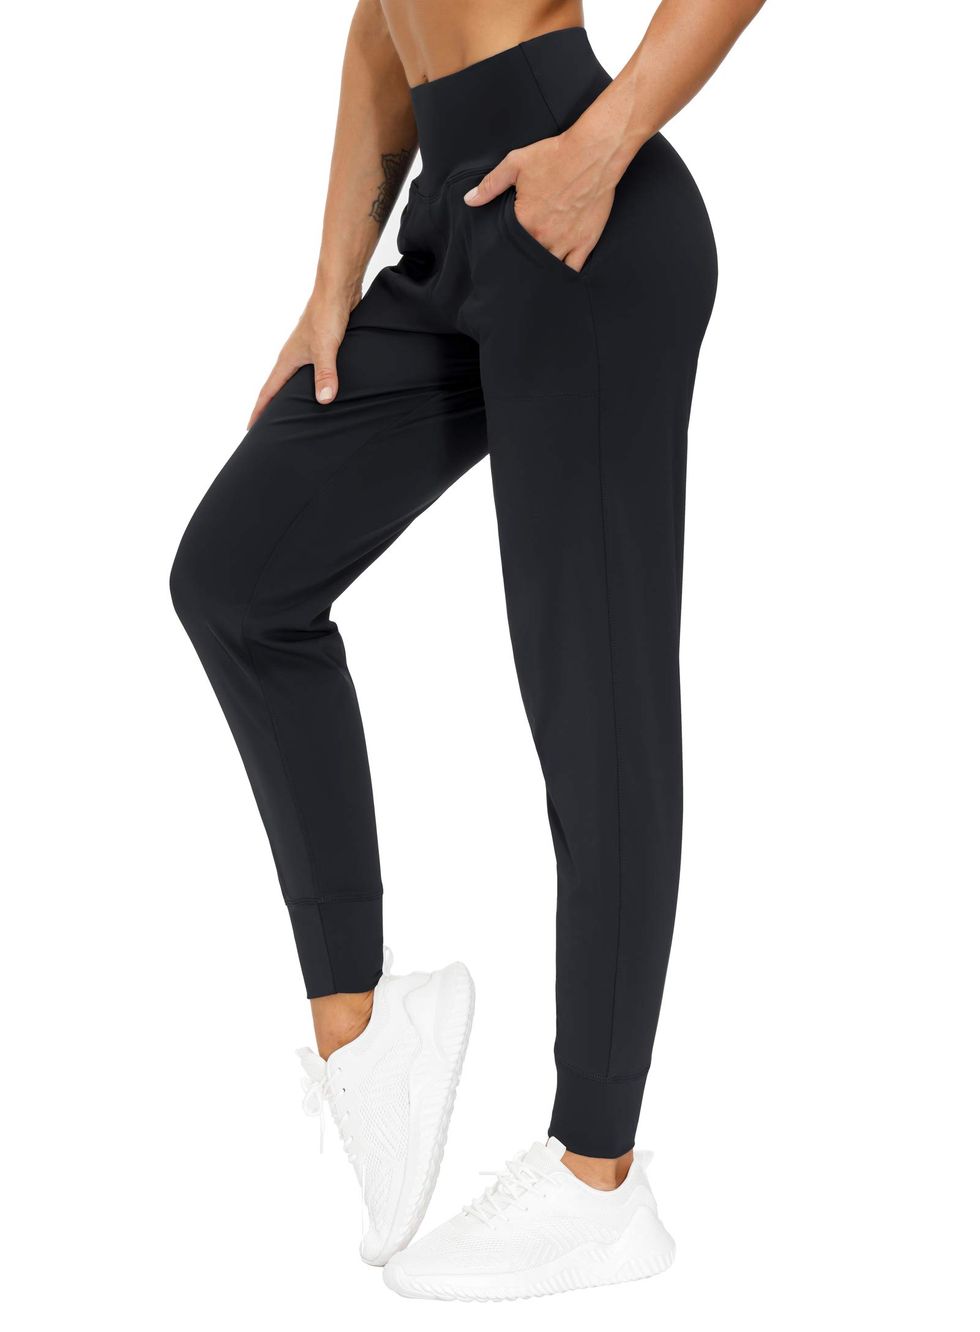 Which Leggings at Costco Are Like Lululemon? - Playbite